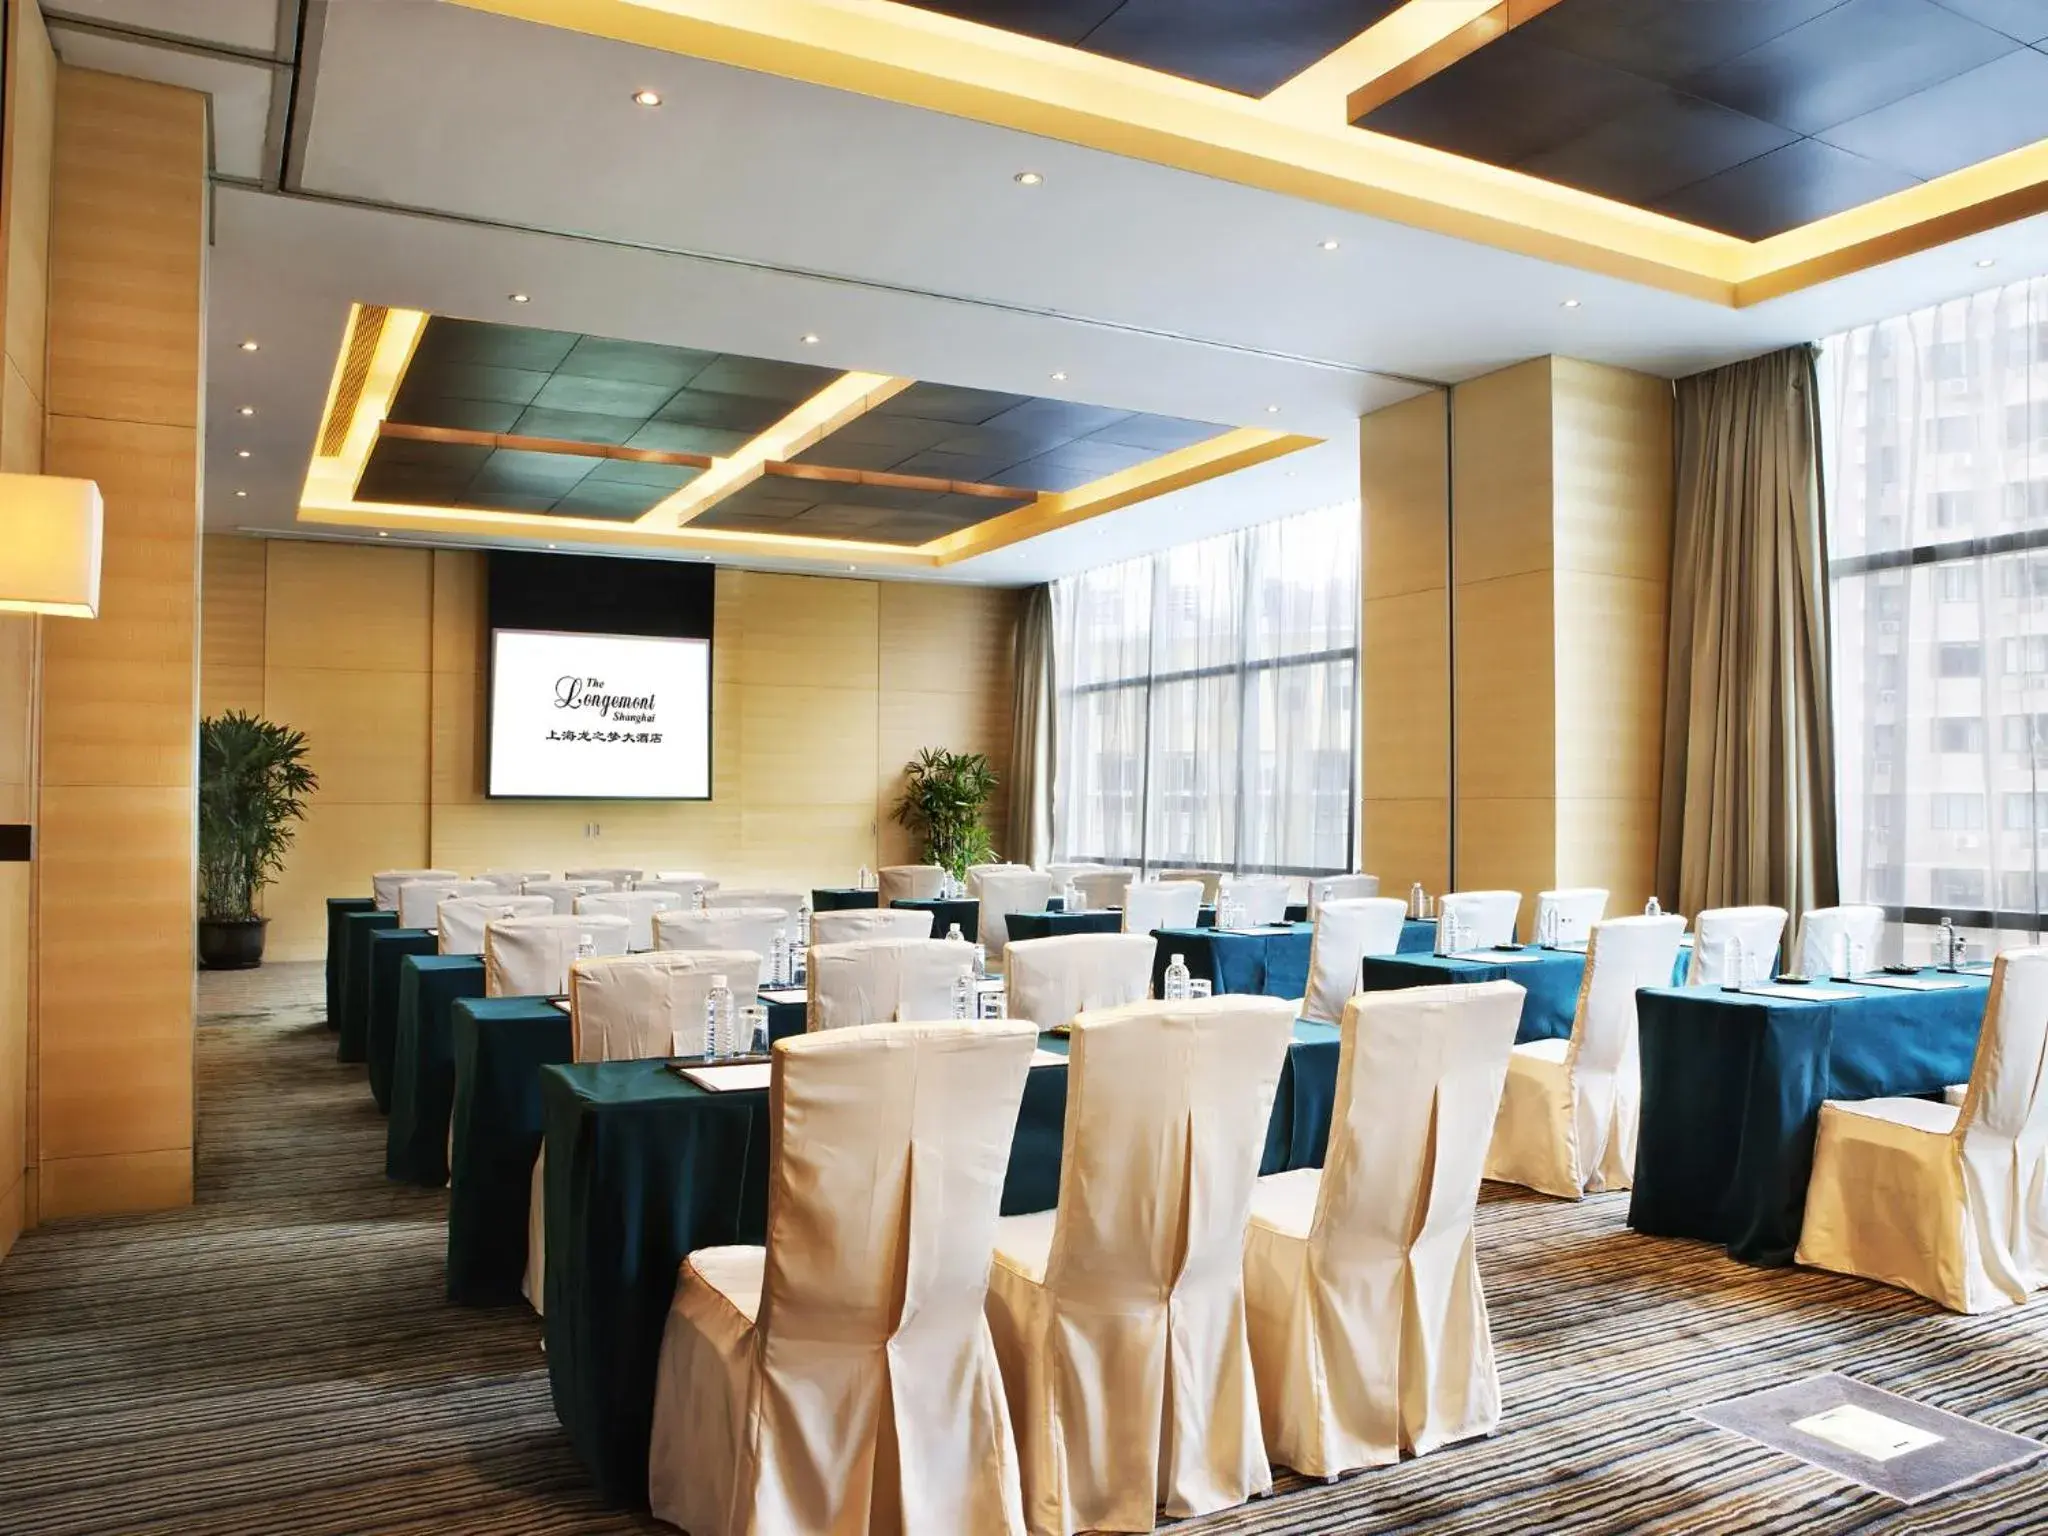 Business facilities in The Longemont Shanghai